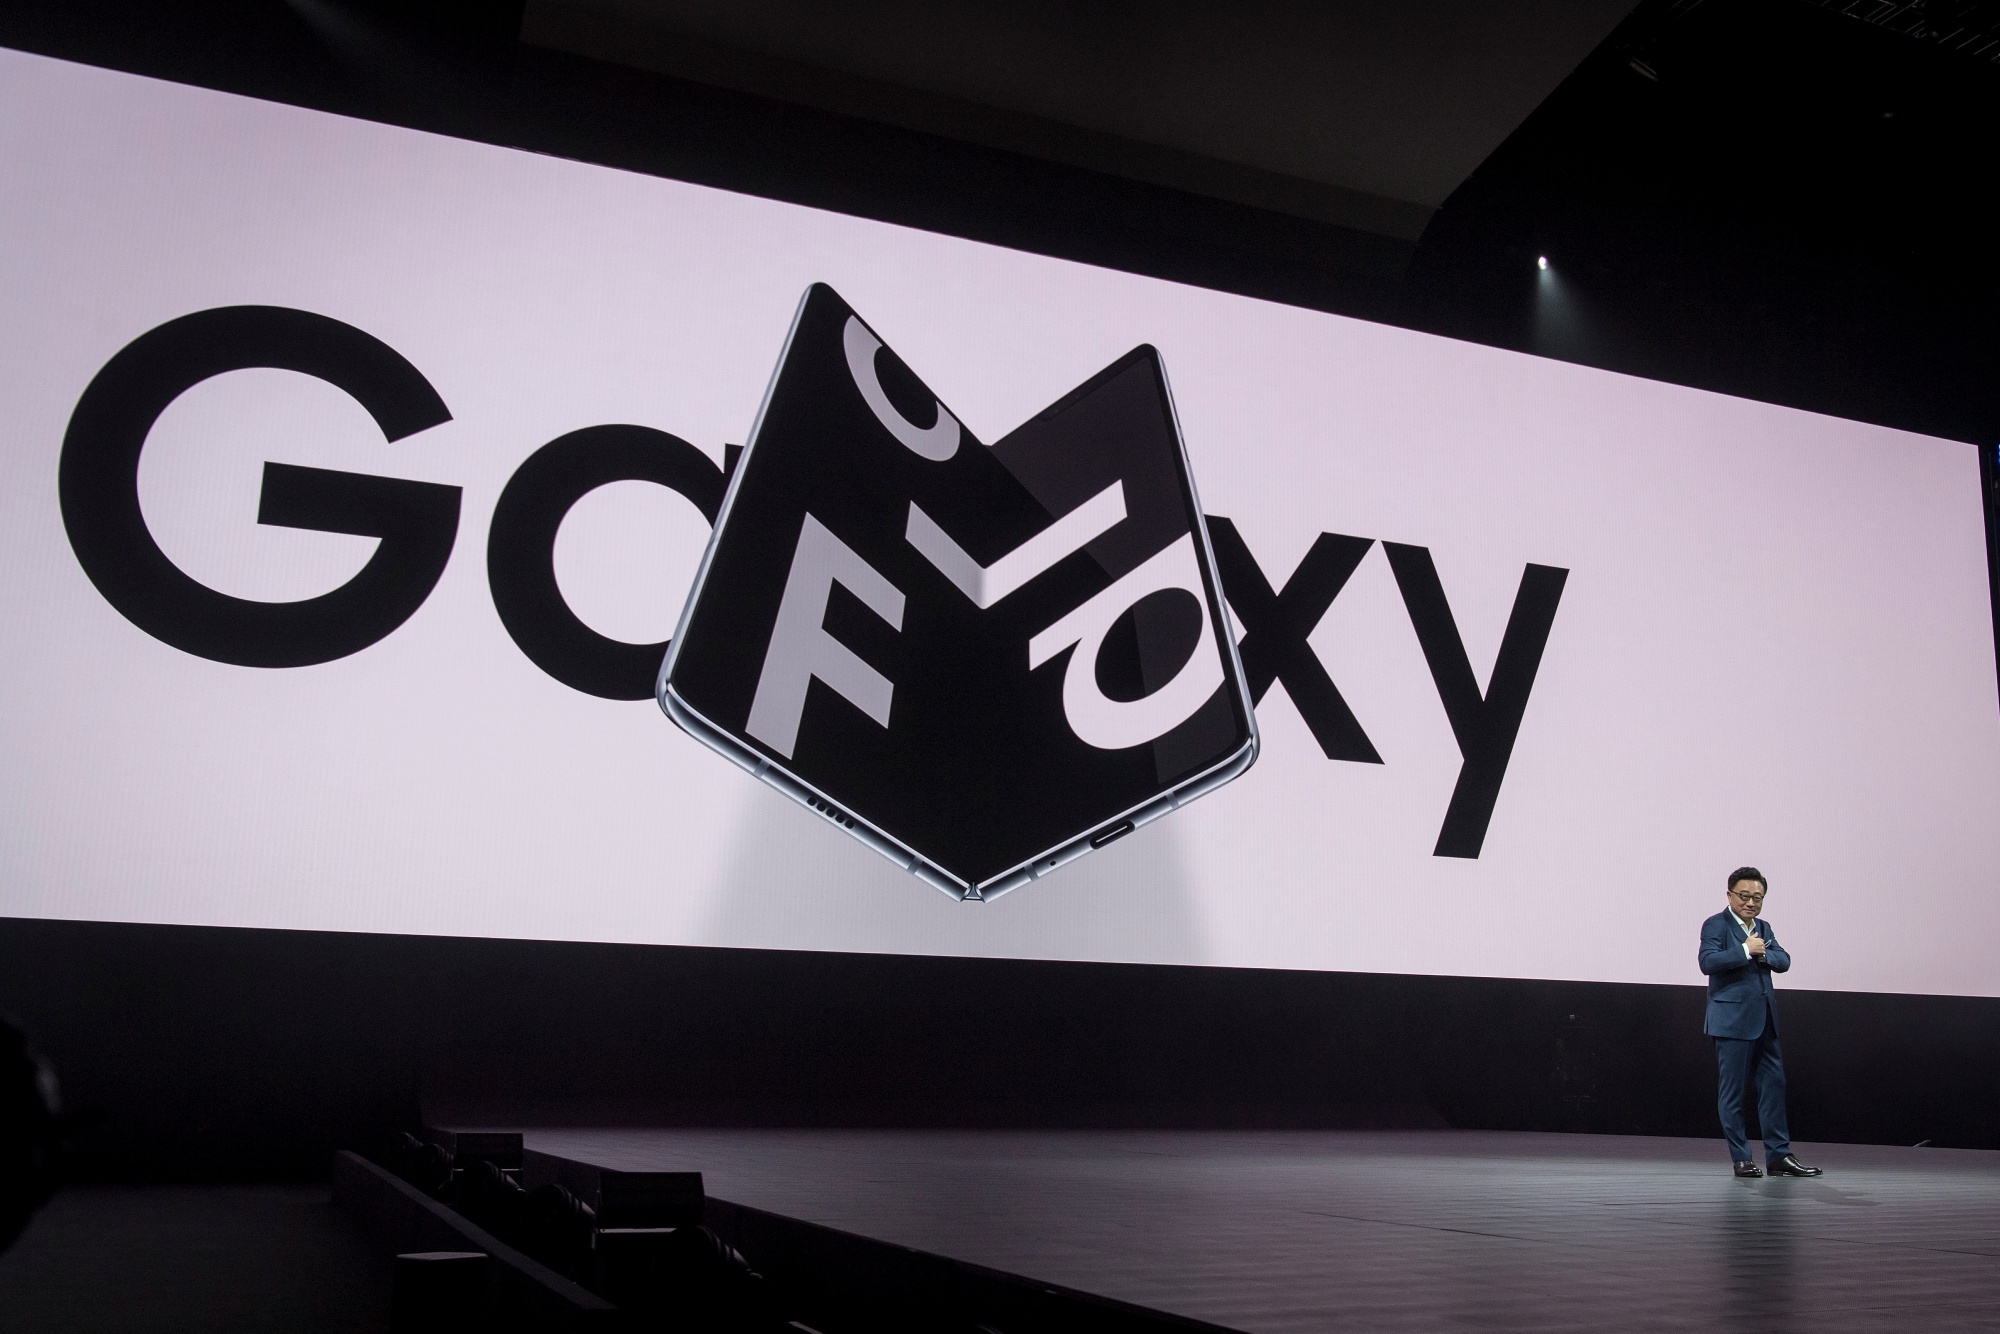 Samsung unveils the Galaxy Fold smartphone during the Samsung Unpacked launch event on Feb. 20.